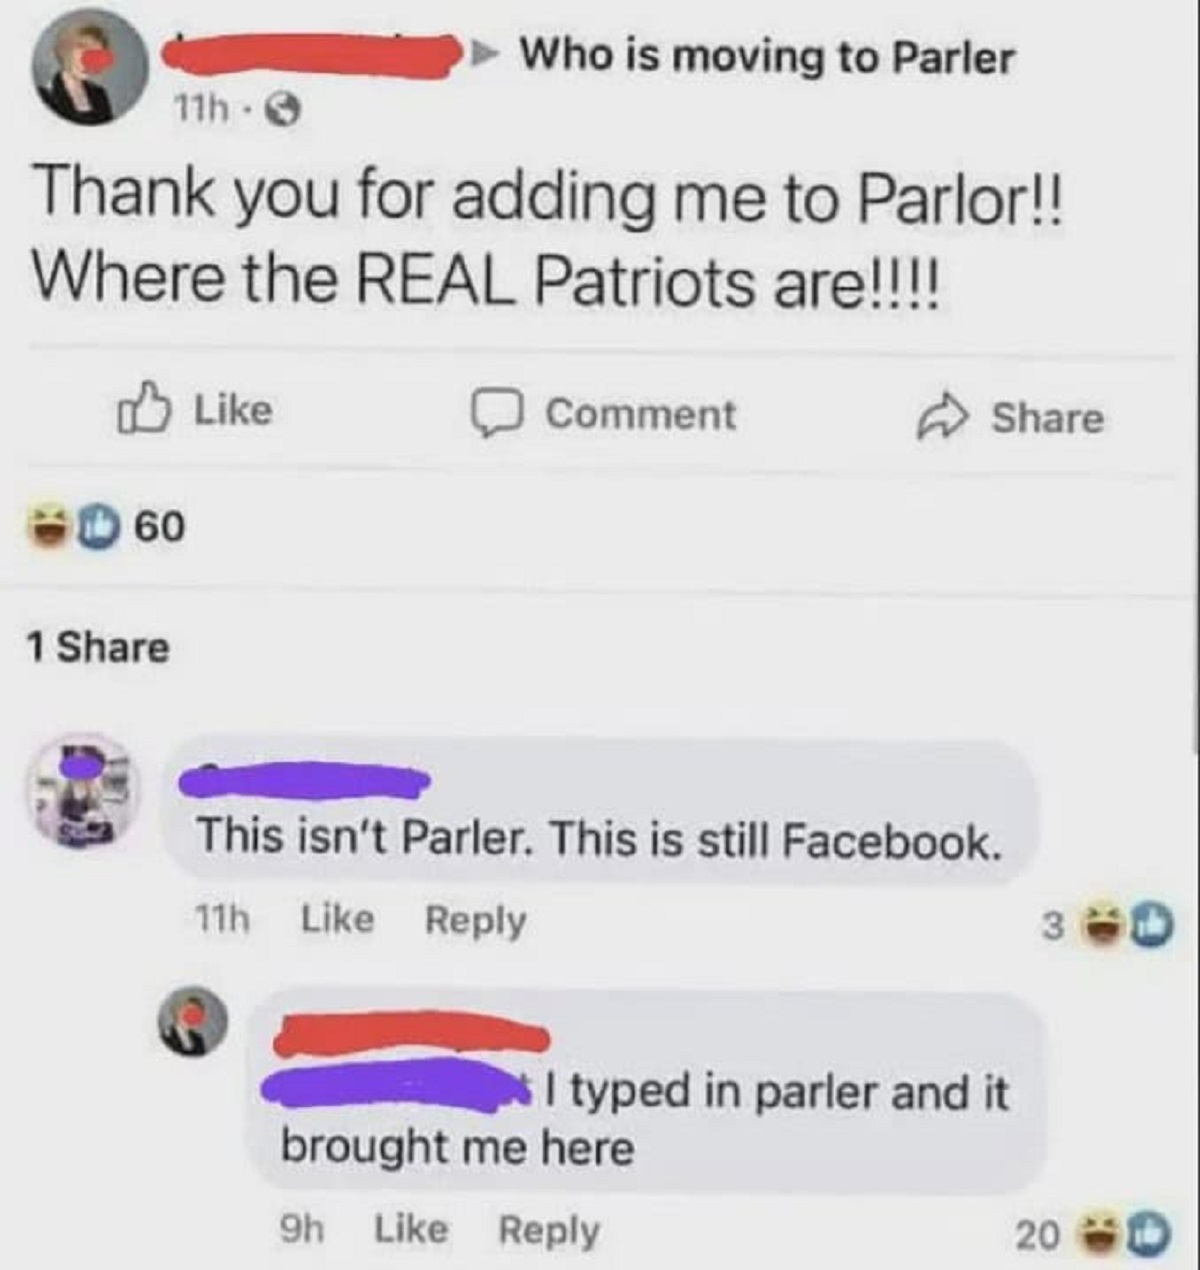 Parler - 11h Who is moving to Parler Thank you for adding me to Parlor!! Where the Real Patriots are!!!! 60 1 Comment This isn't Parler. This is still Facebook. 11h I typed in parler and it brought me here 9h 20